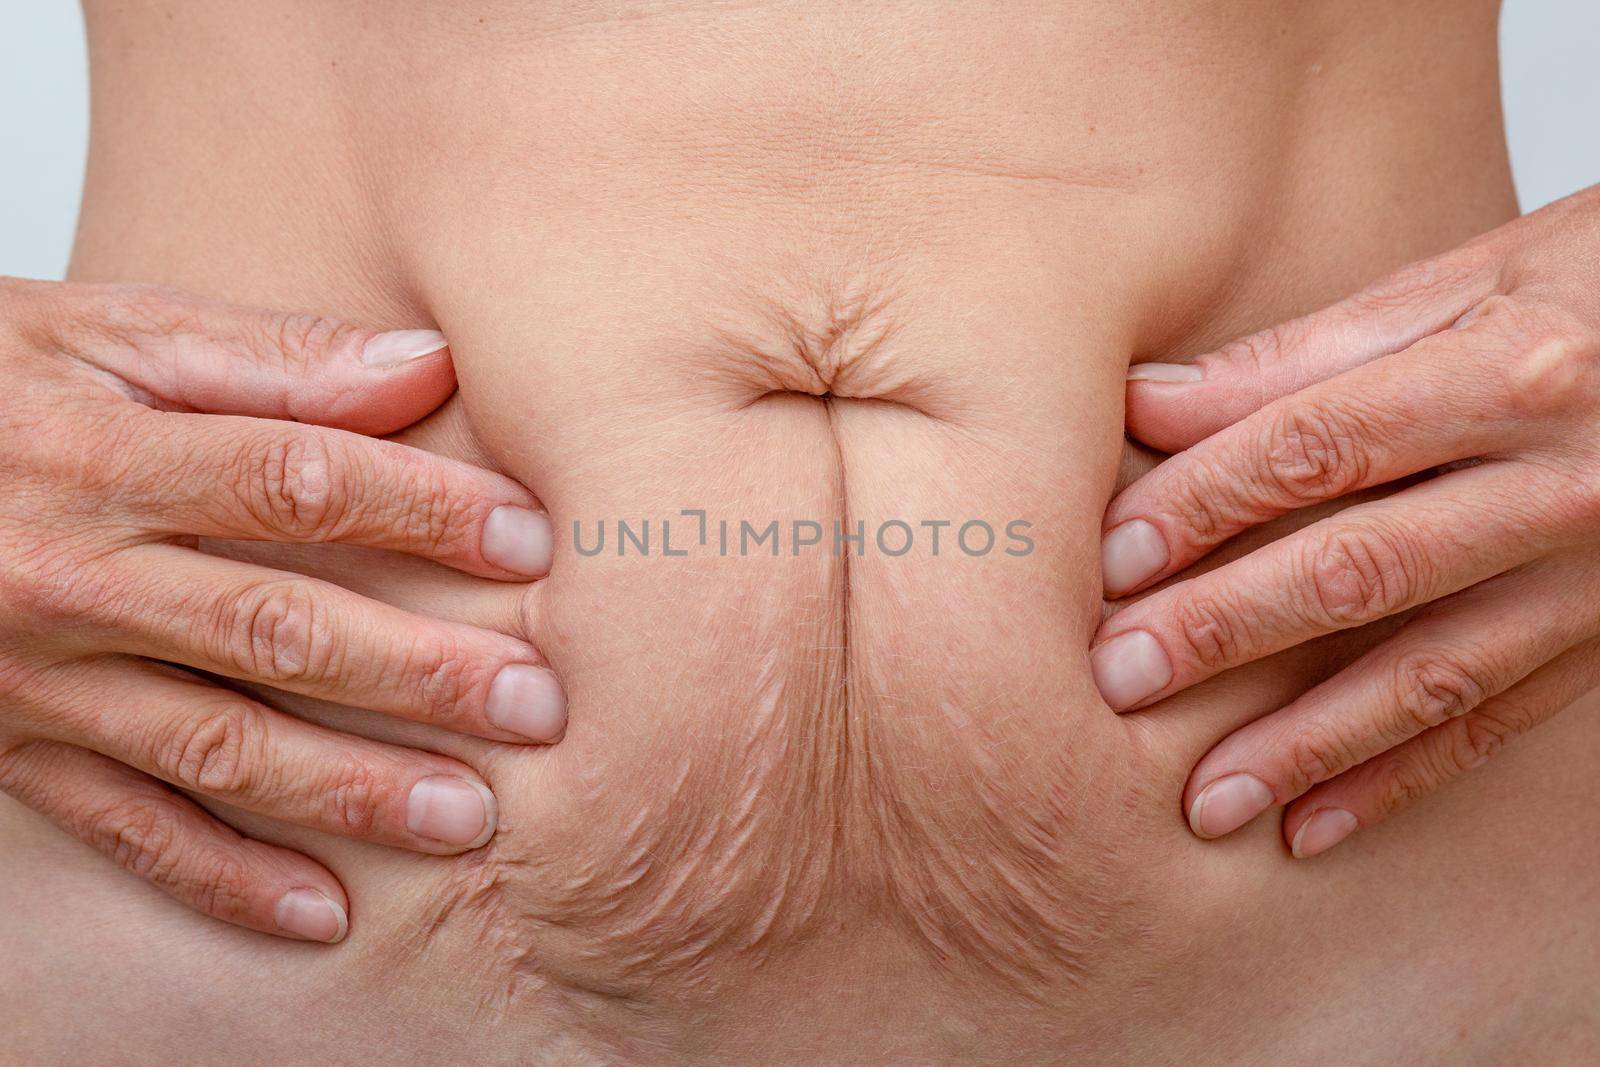 Hands on belly pressed skin to show sagging skin after diet and stretch marks after pregnancy by TatianaFoxy